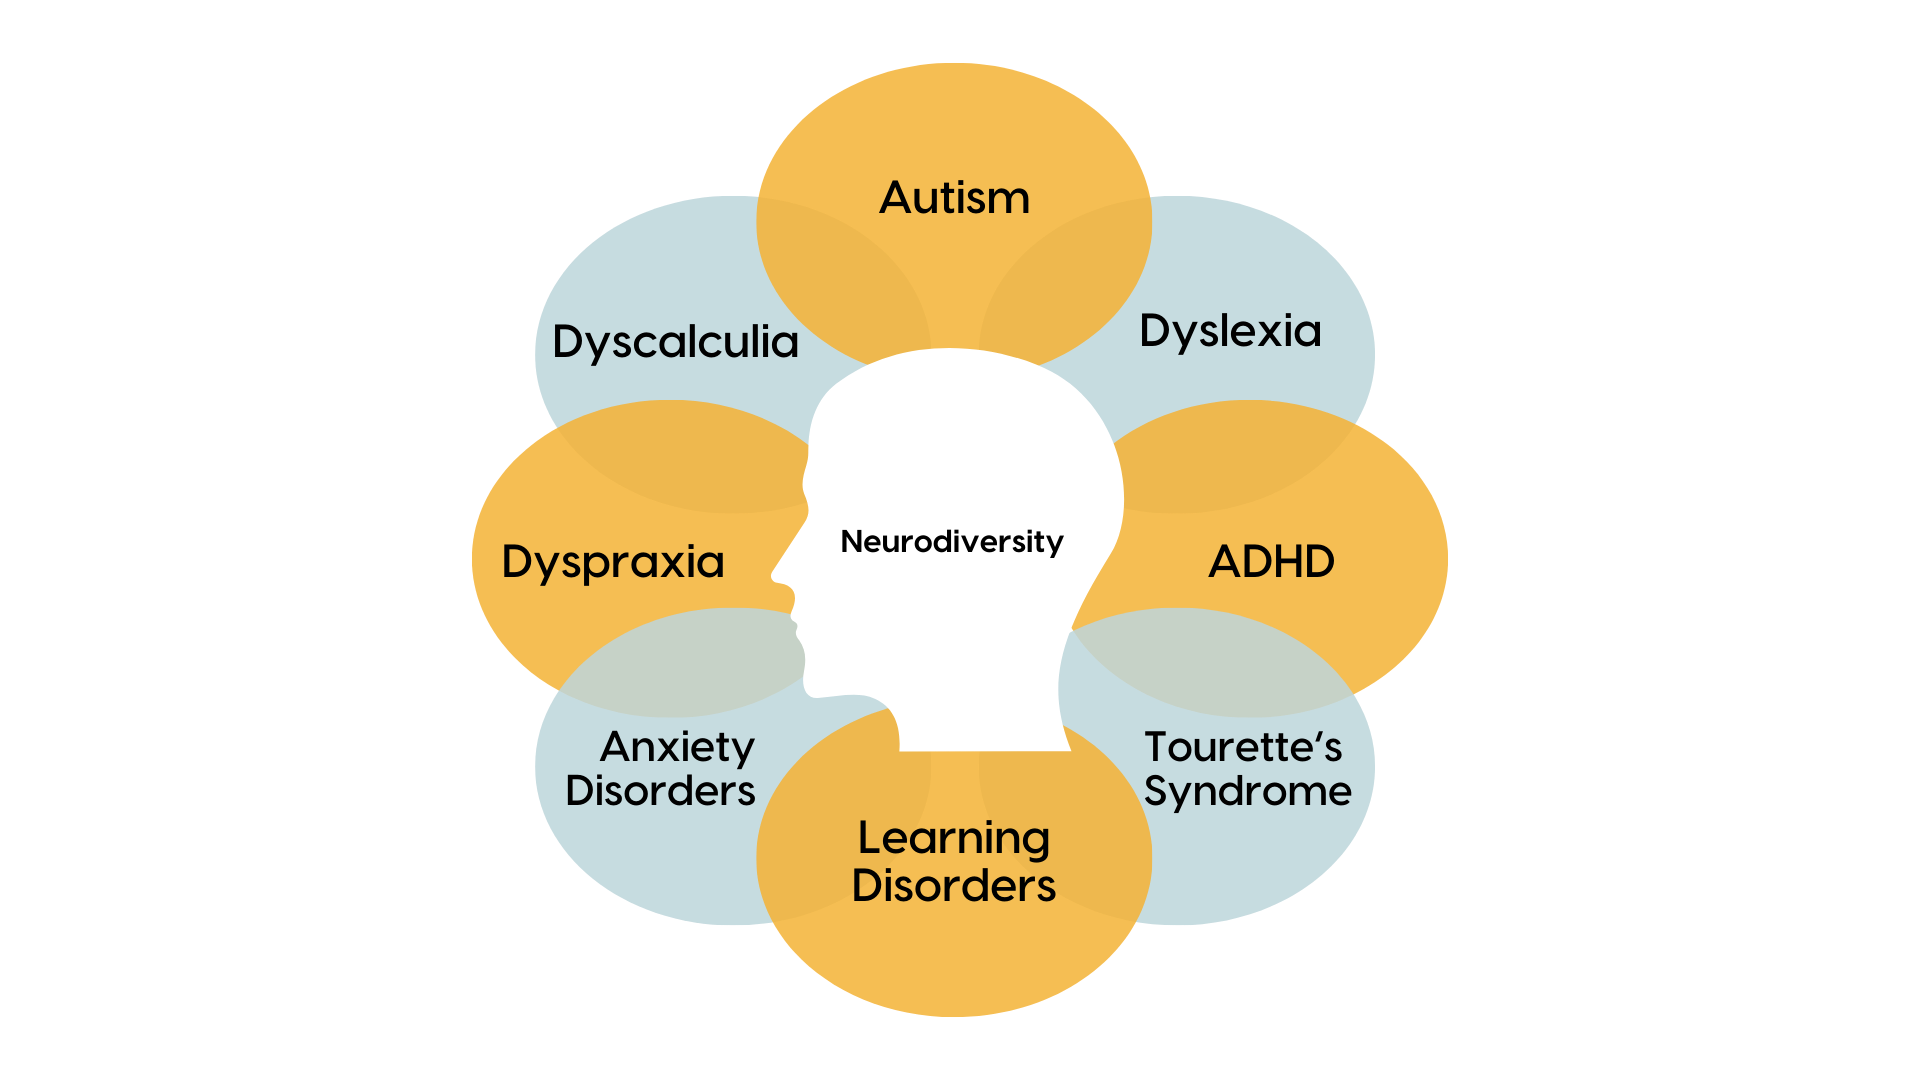 A diagram, in orange and blue, that depicts the most common conditions associated with neurodiversity - Autism, Dyslexia, ADHD, Tourette's Syndrome, Learning Disorders, Anxiety Disorders, Dyspraxia and Dyscalculia.